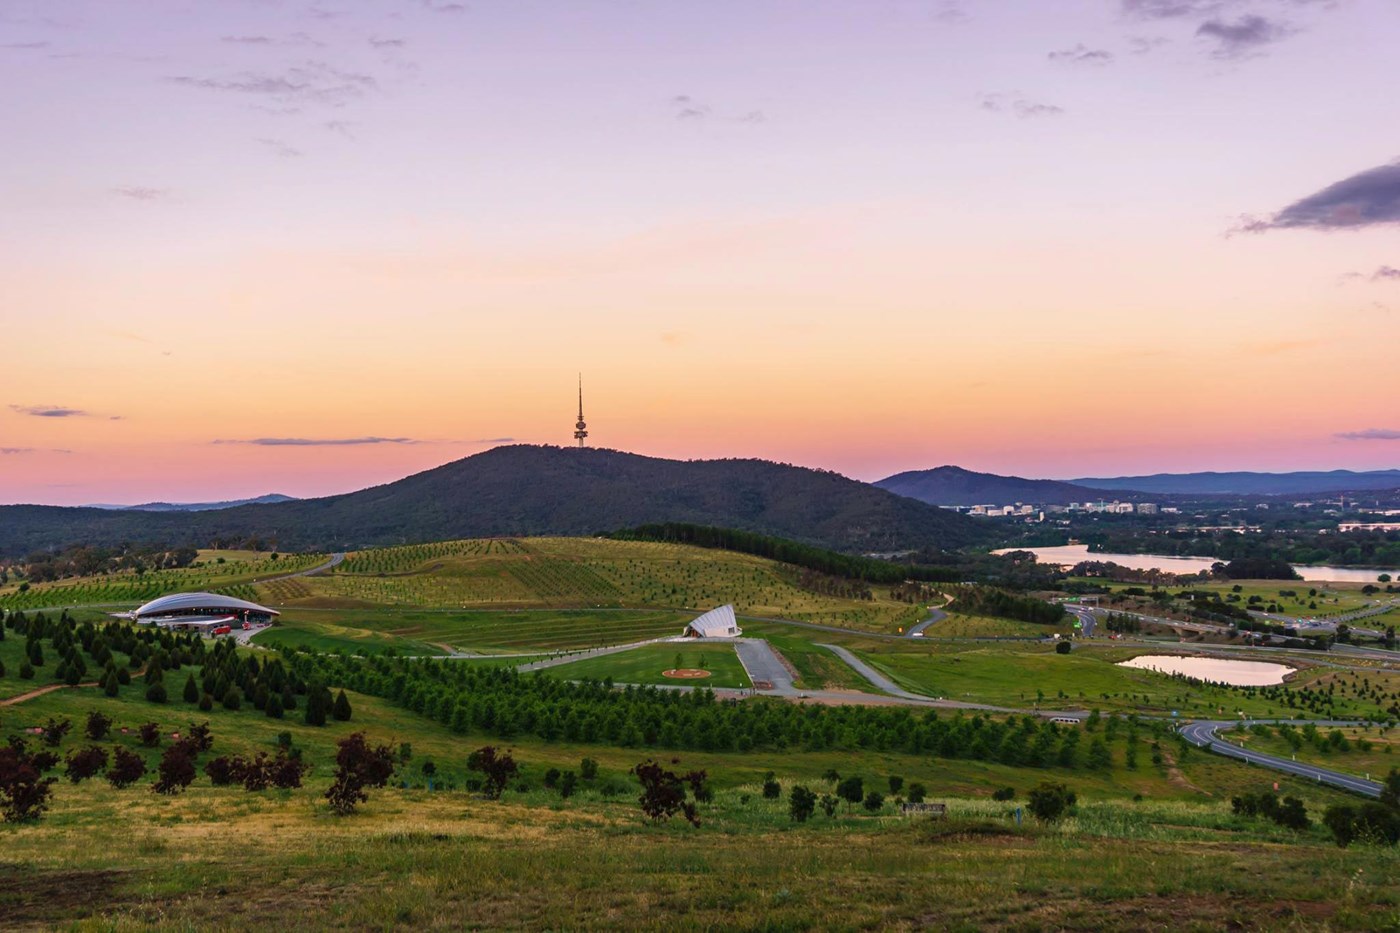 Landscape view of National Arboretum in Canberra at sunset with orange and pink sky